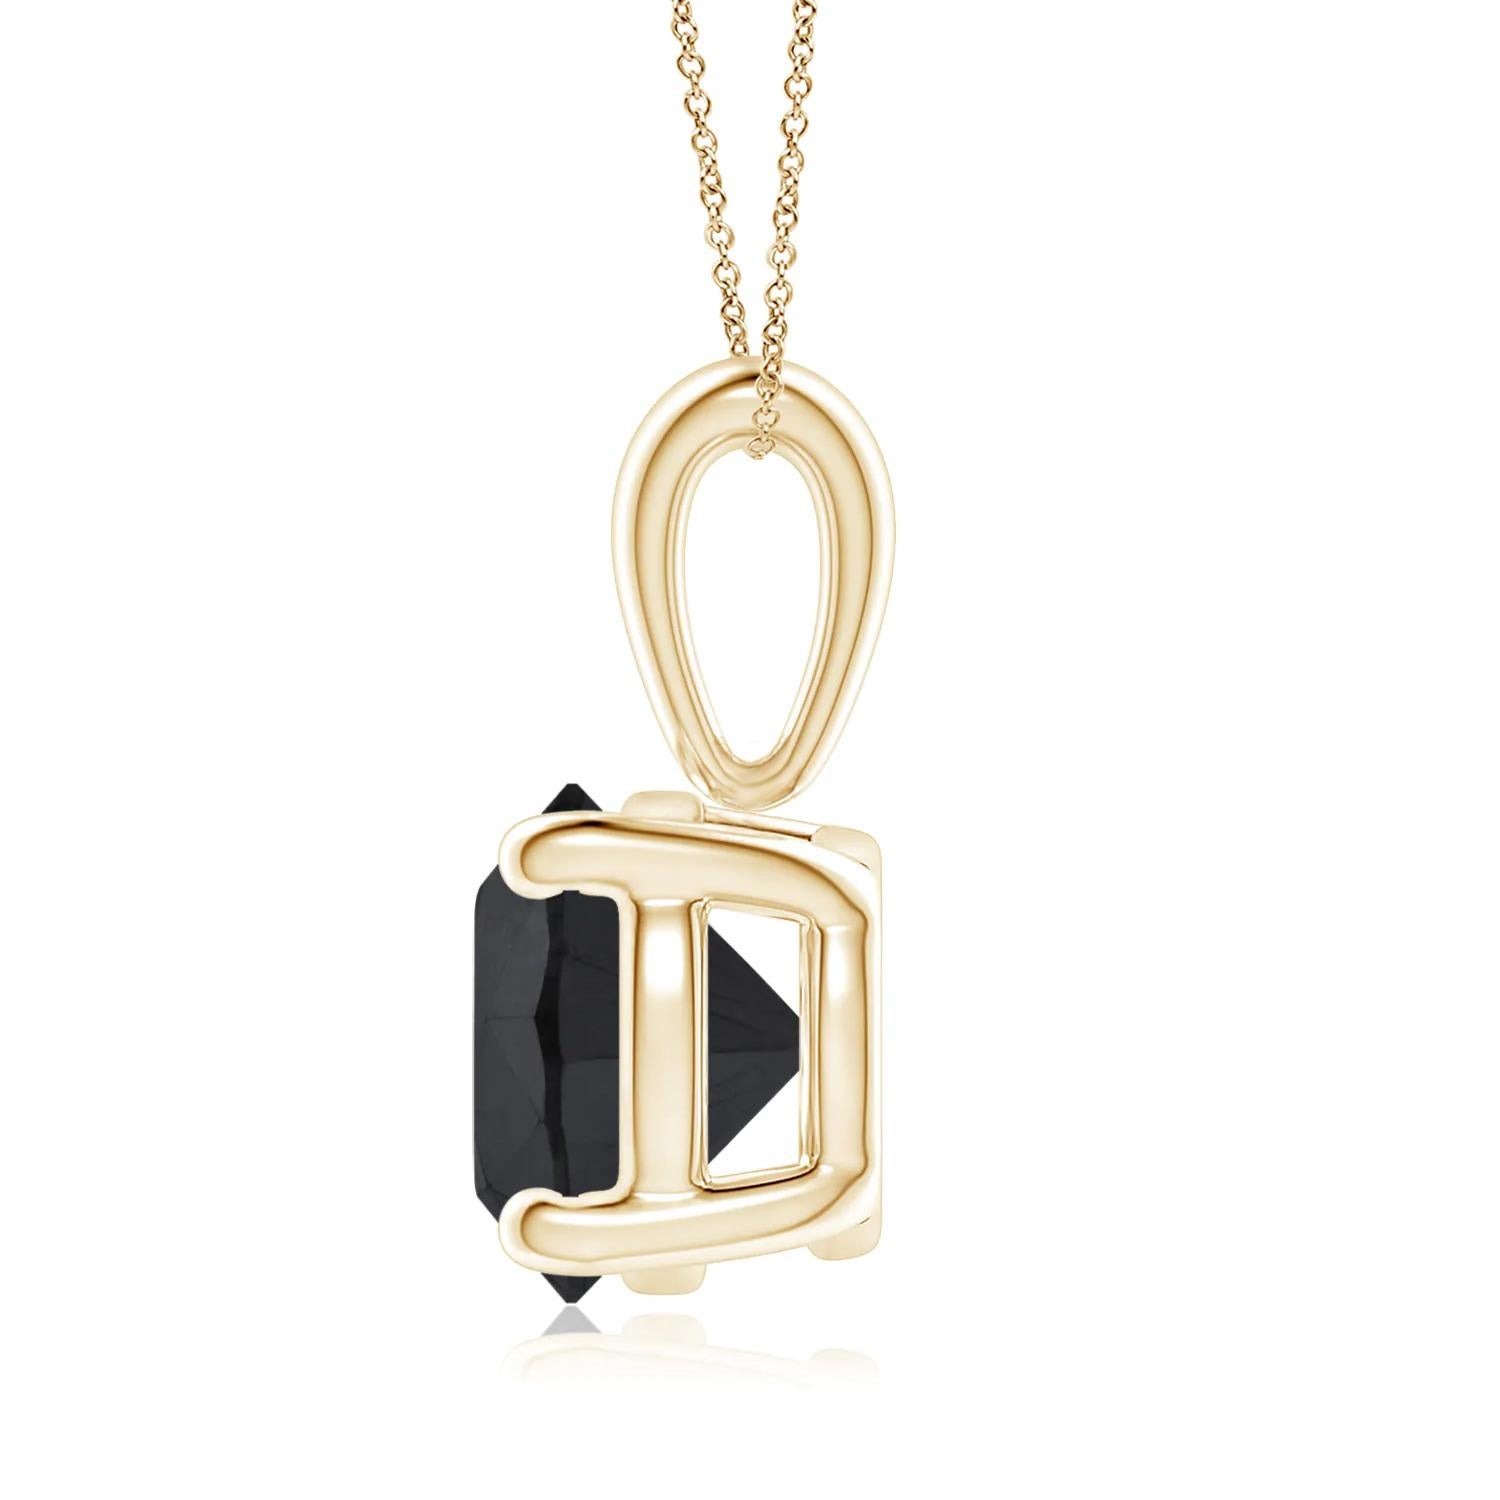 Round Cut 1.35 Carat Round Black Diamond Solitaire Pendant Necklace in 14K Yellow Gold